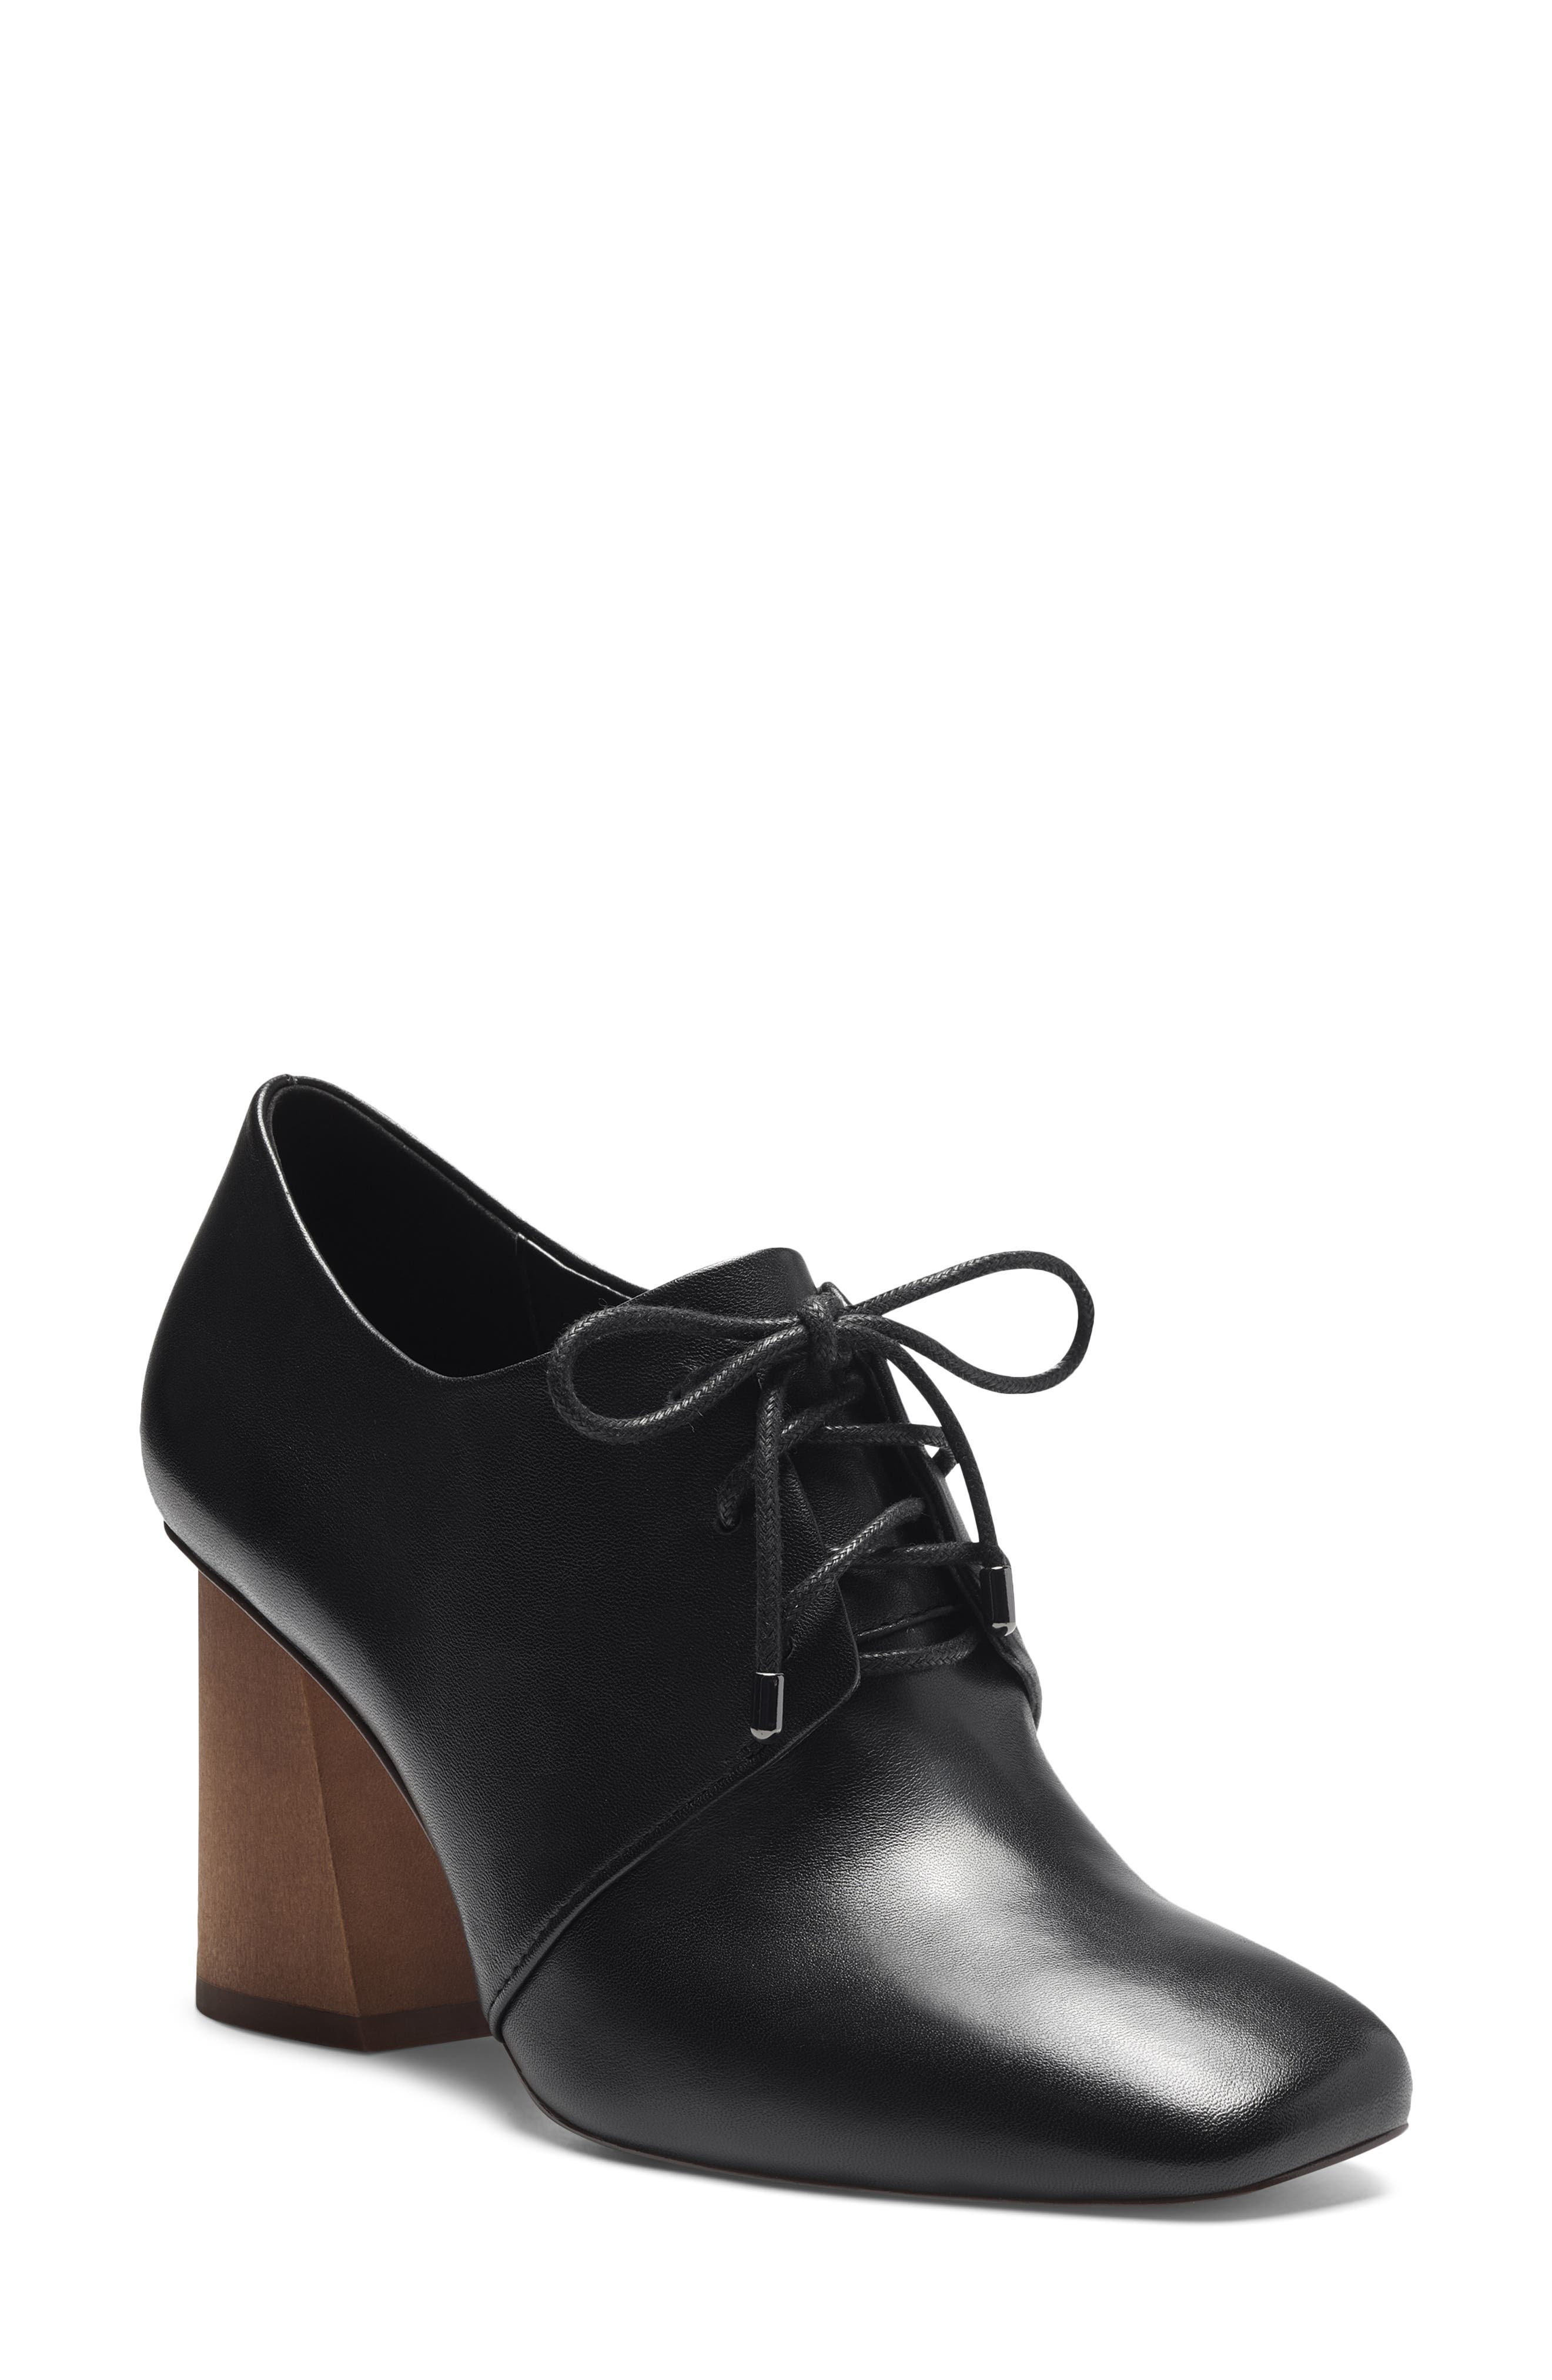 nordstrom womens oxford shoes